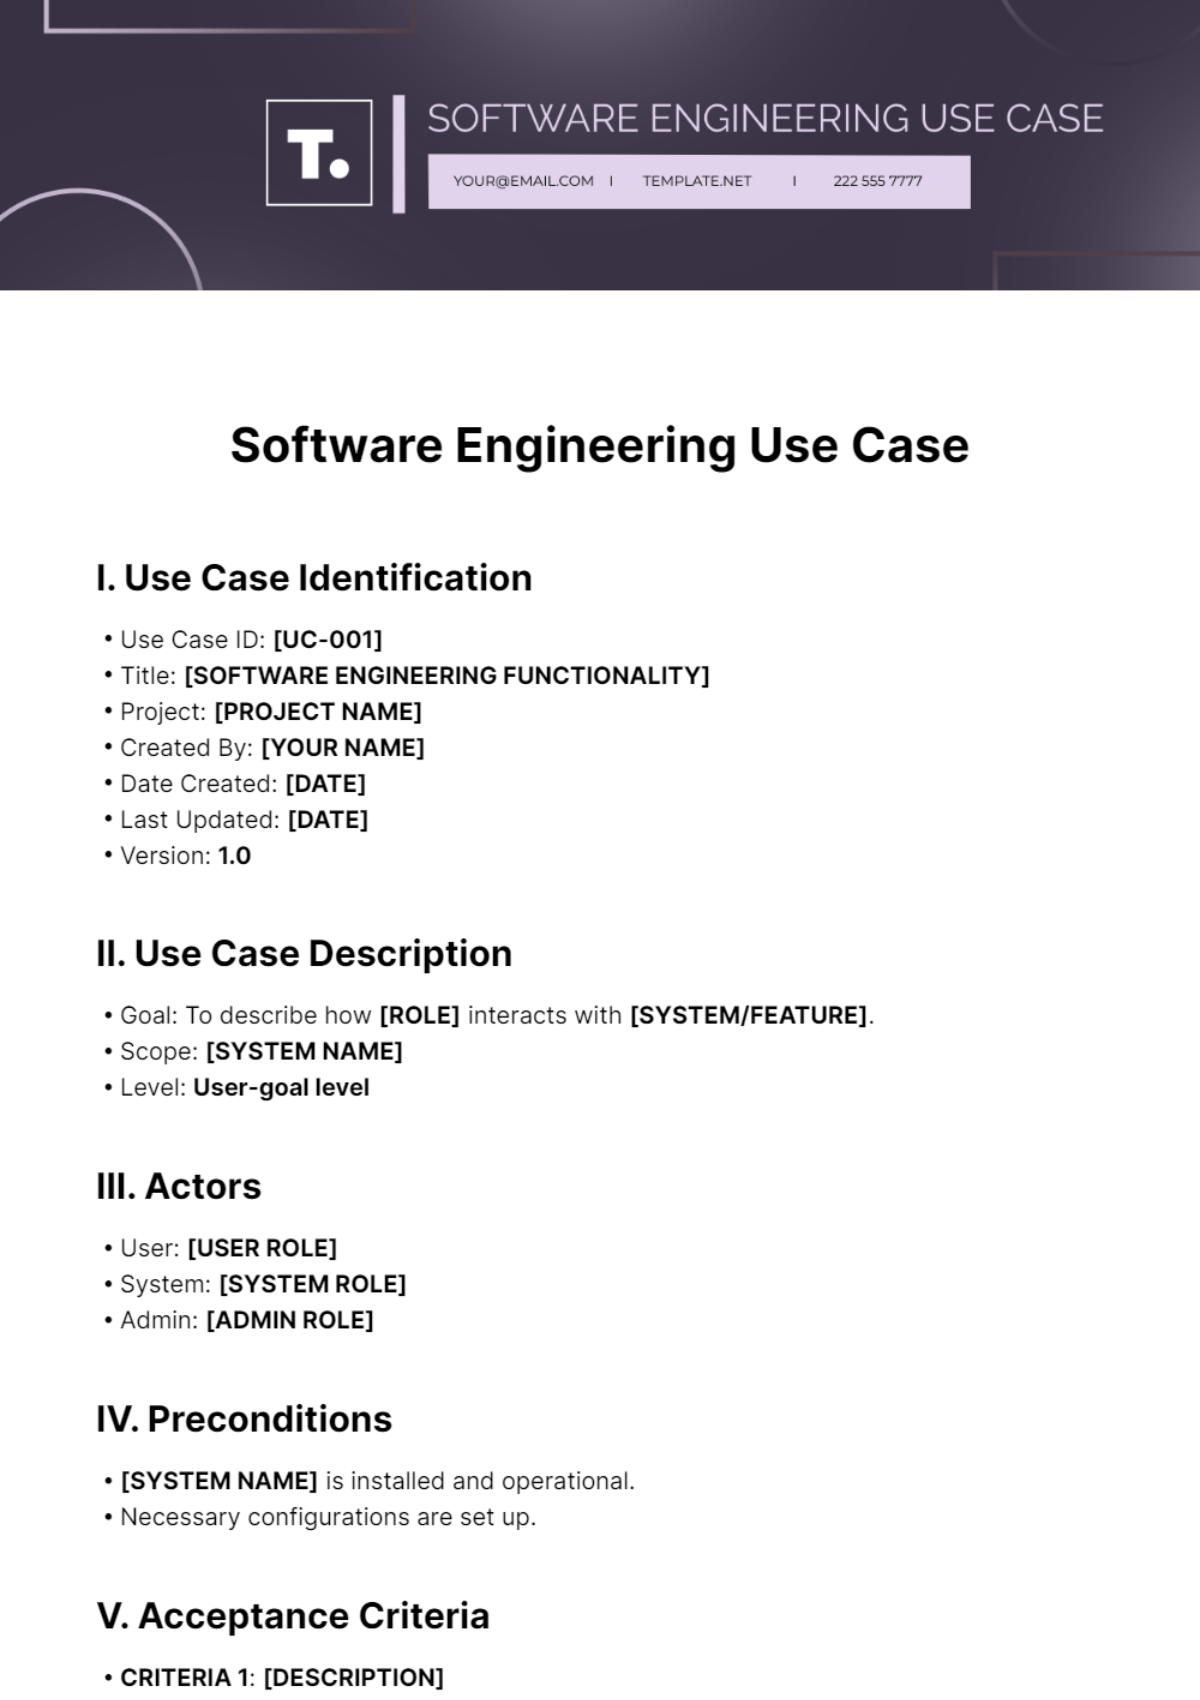 Software Engineering Use Case Template